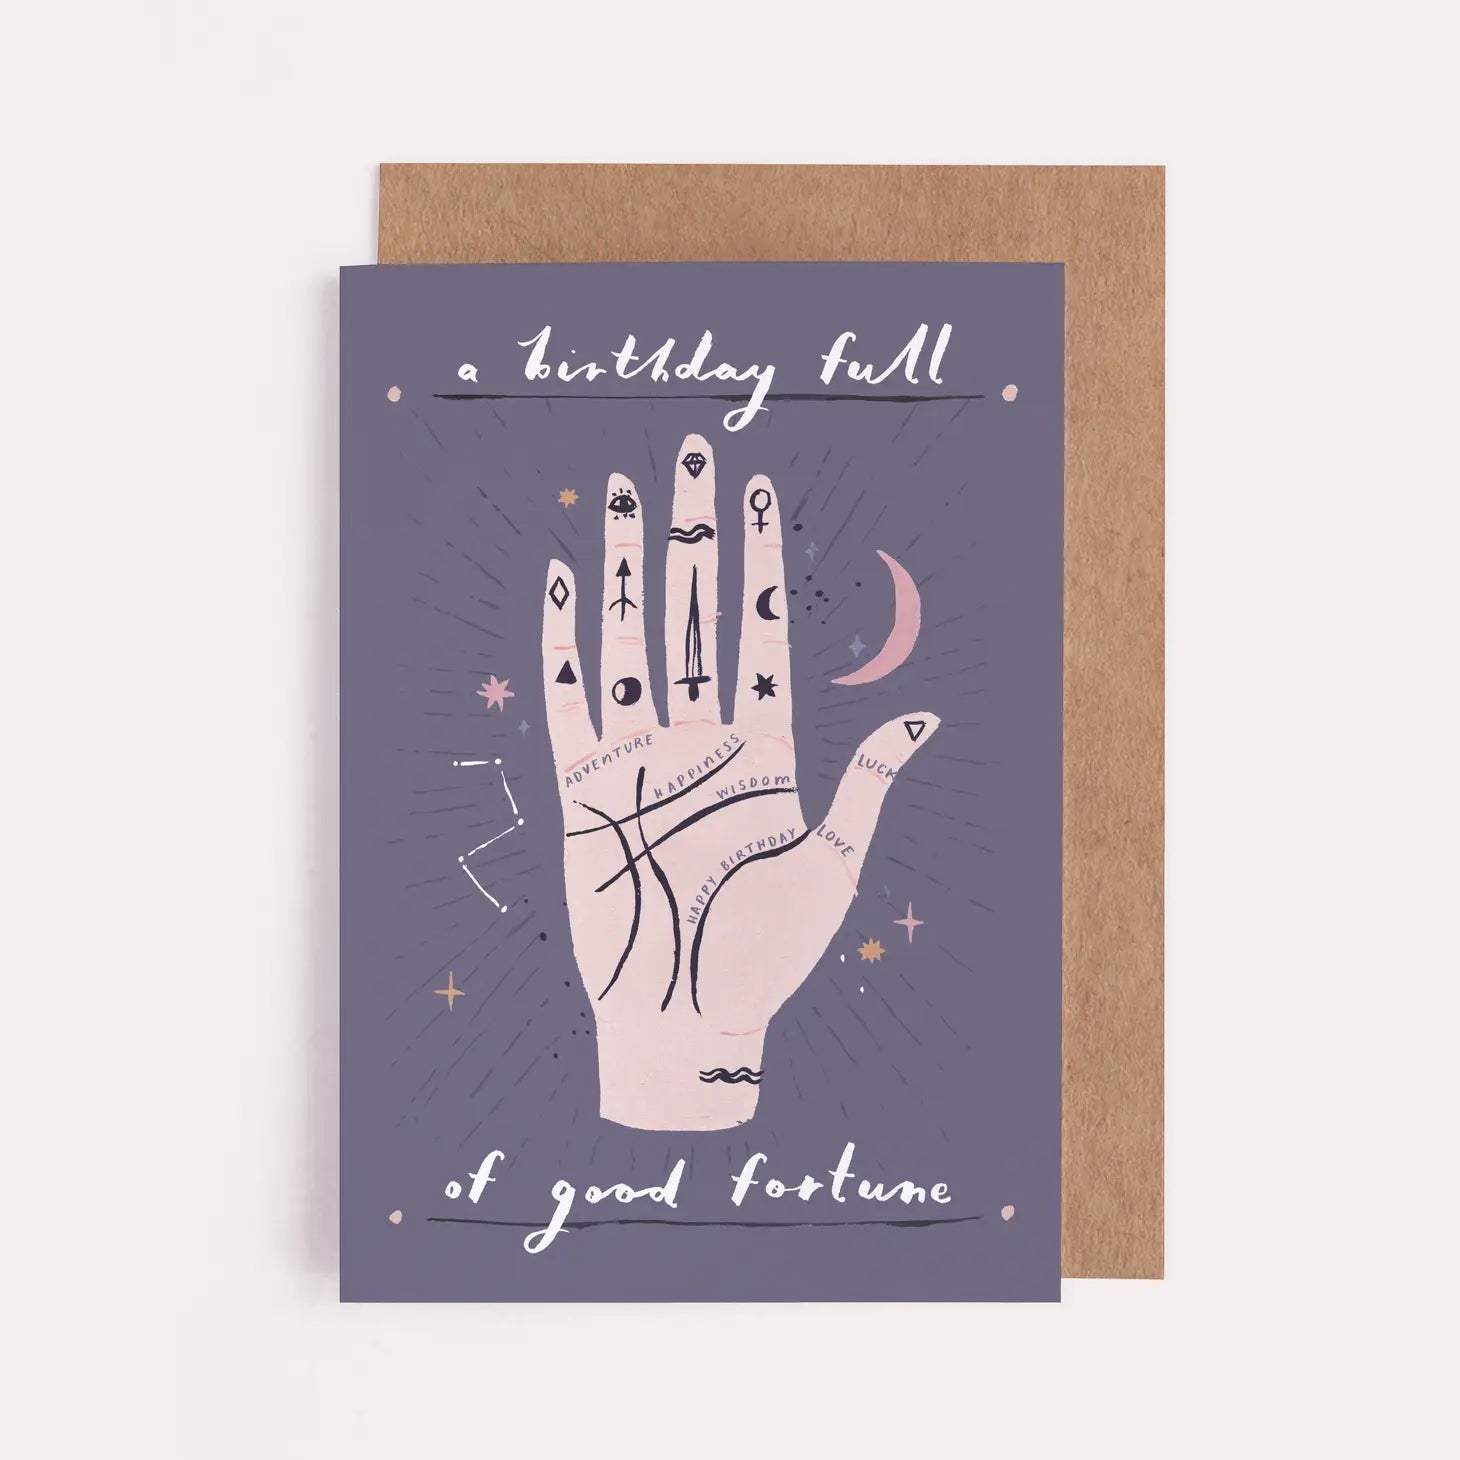 llustrated palmistry birthday card with a birthday full of good fortune' hand lettering.  Birthday card with 100% recycled kraft envelope. Blank inside